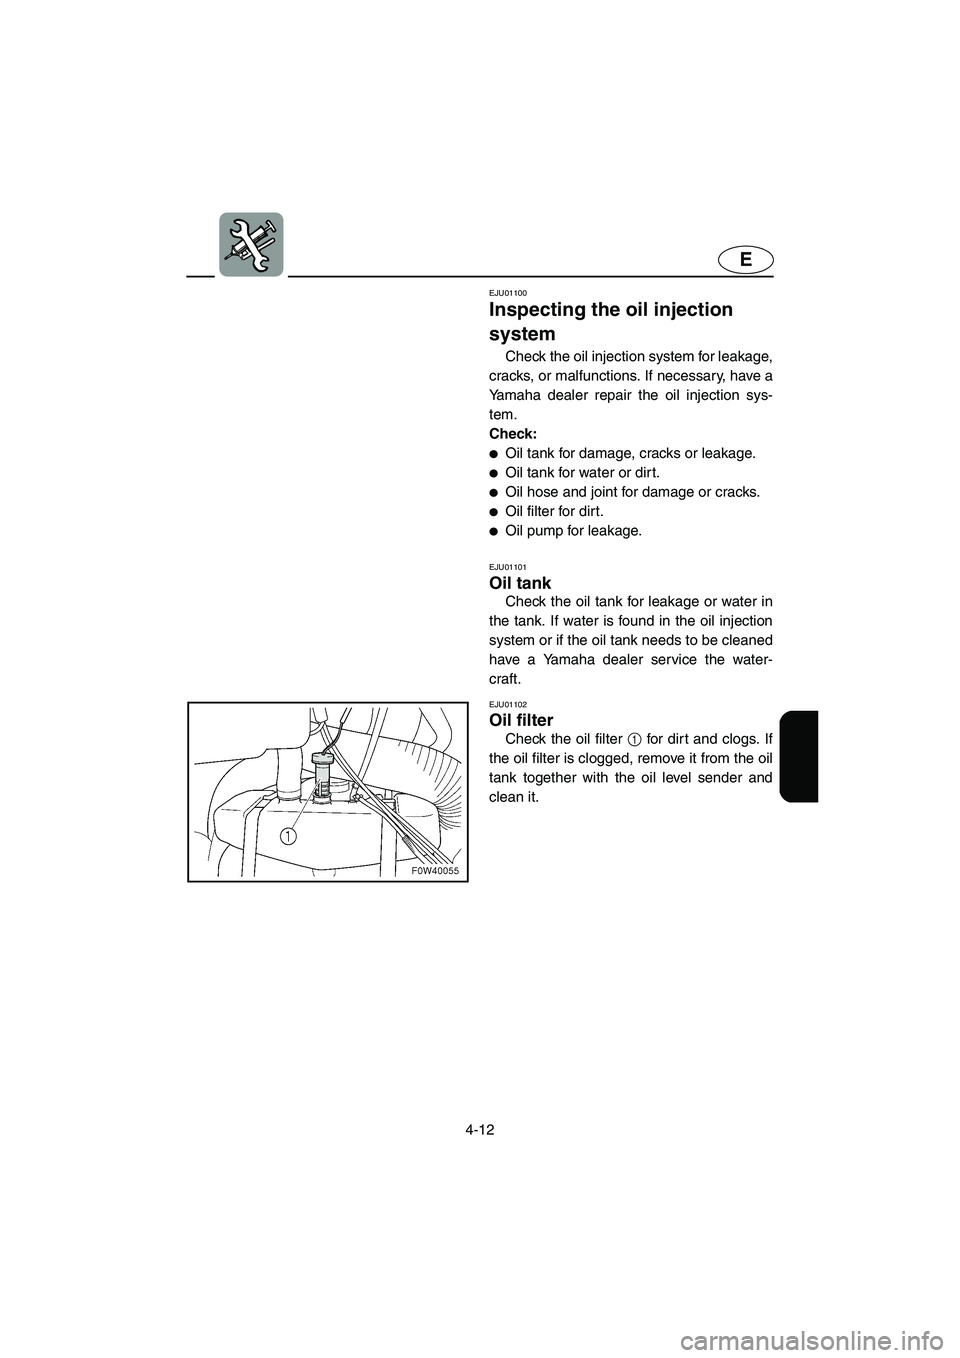 YAMAHA GP800R 2002  Owners Manual 4-12
E
EJU01100 
Inspecting the oil injection 
system  
Check the oil injection system for leakage,
cracks, or malfunctions. If necessary, have a
Yamaha dealer repair the oil injection sys-
tem. 
Chec